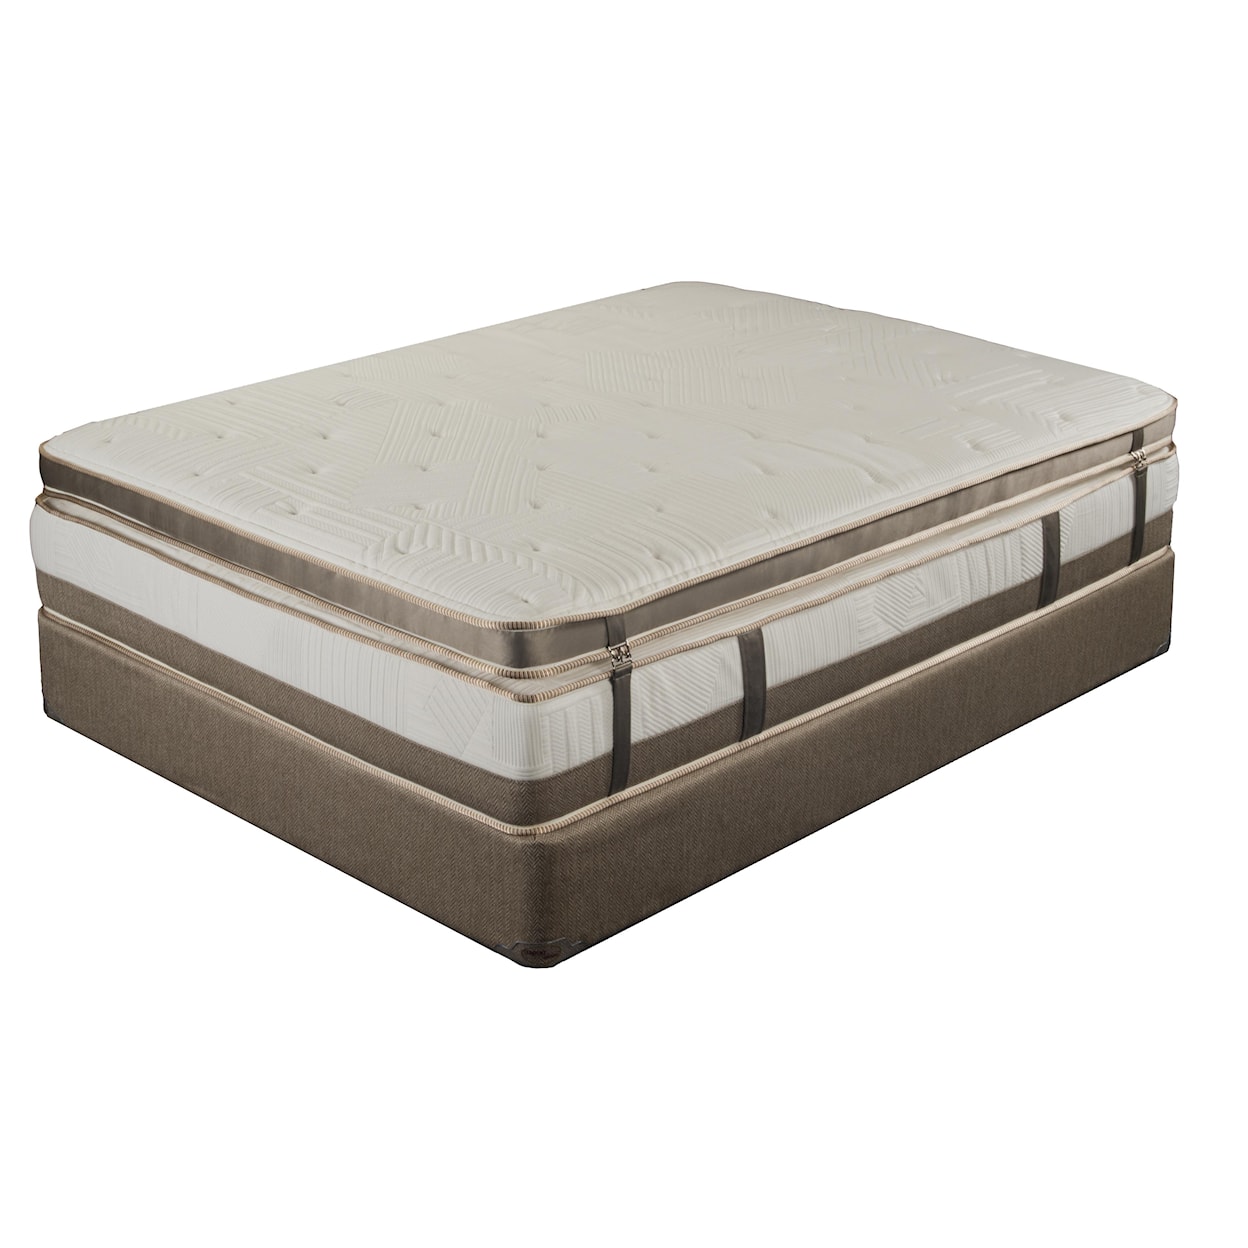 King Koil Extended Life 3300 King Mattress with Removable Top Layer